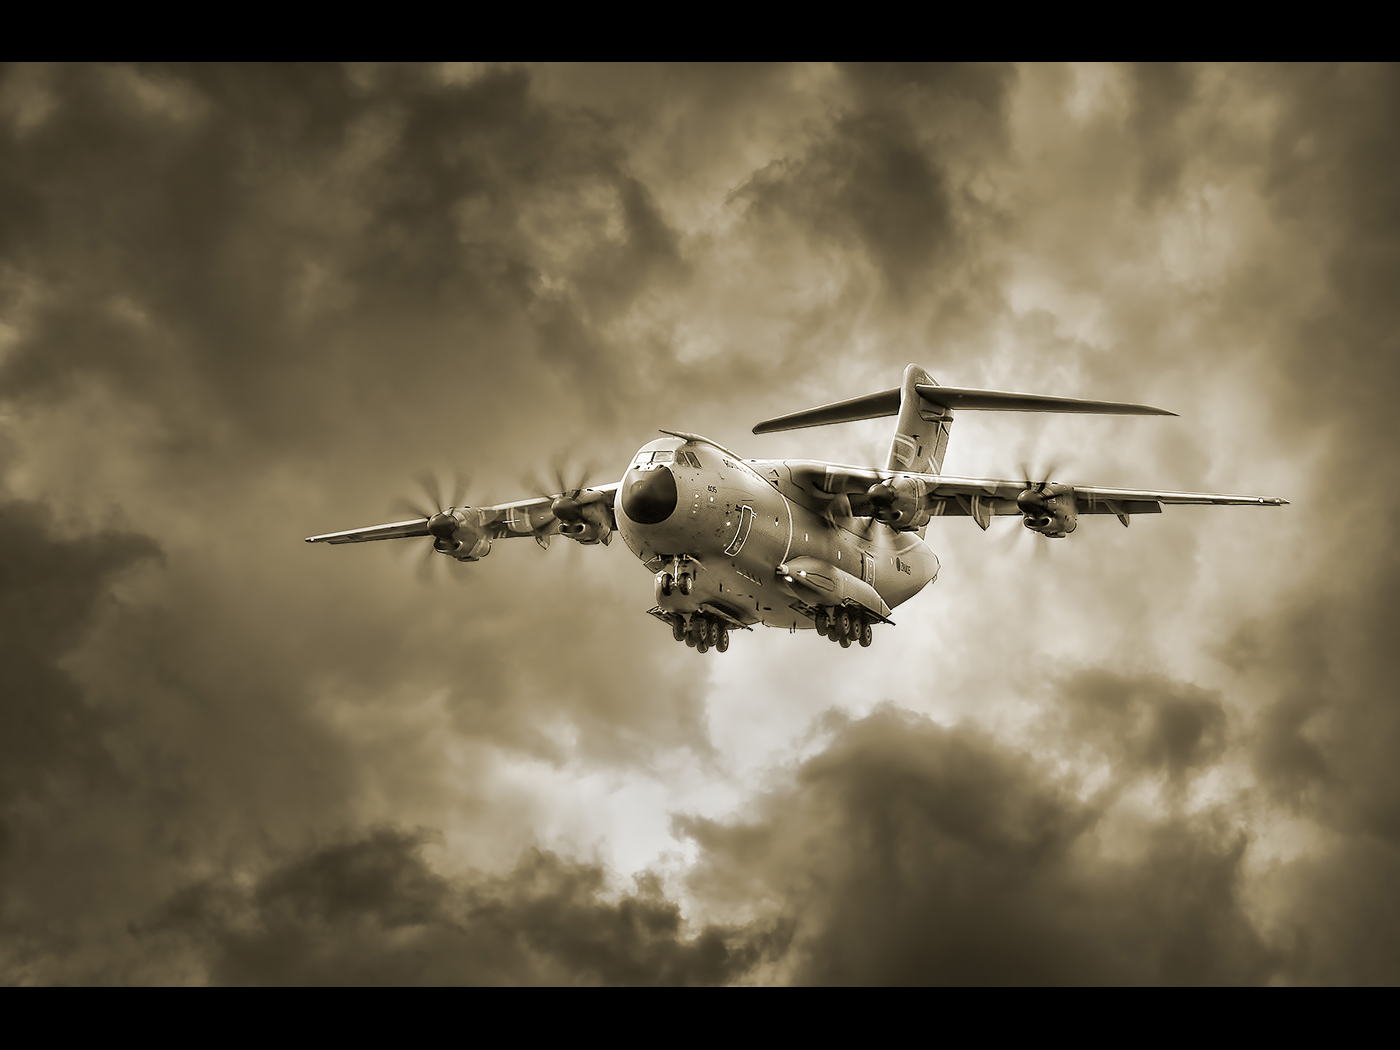 A400M Military Transport Plane by Anthony Gosling